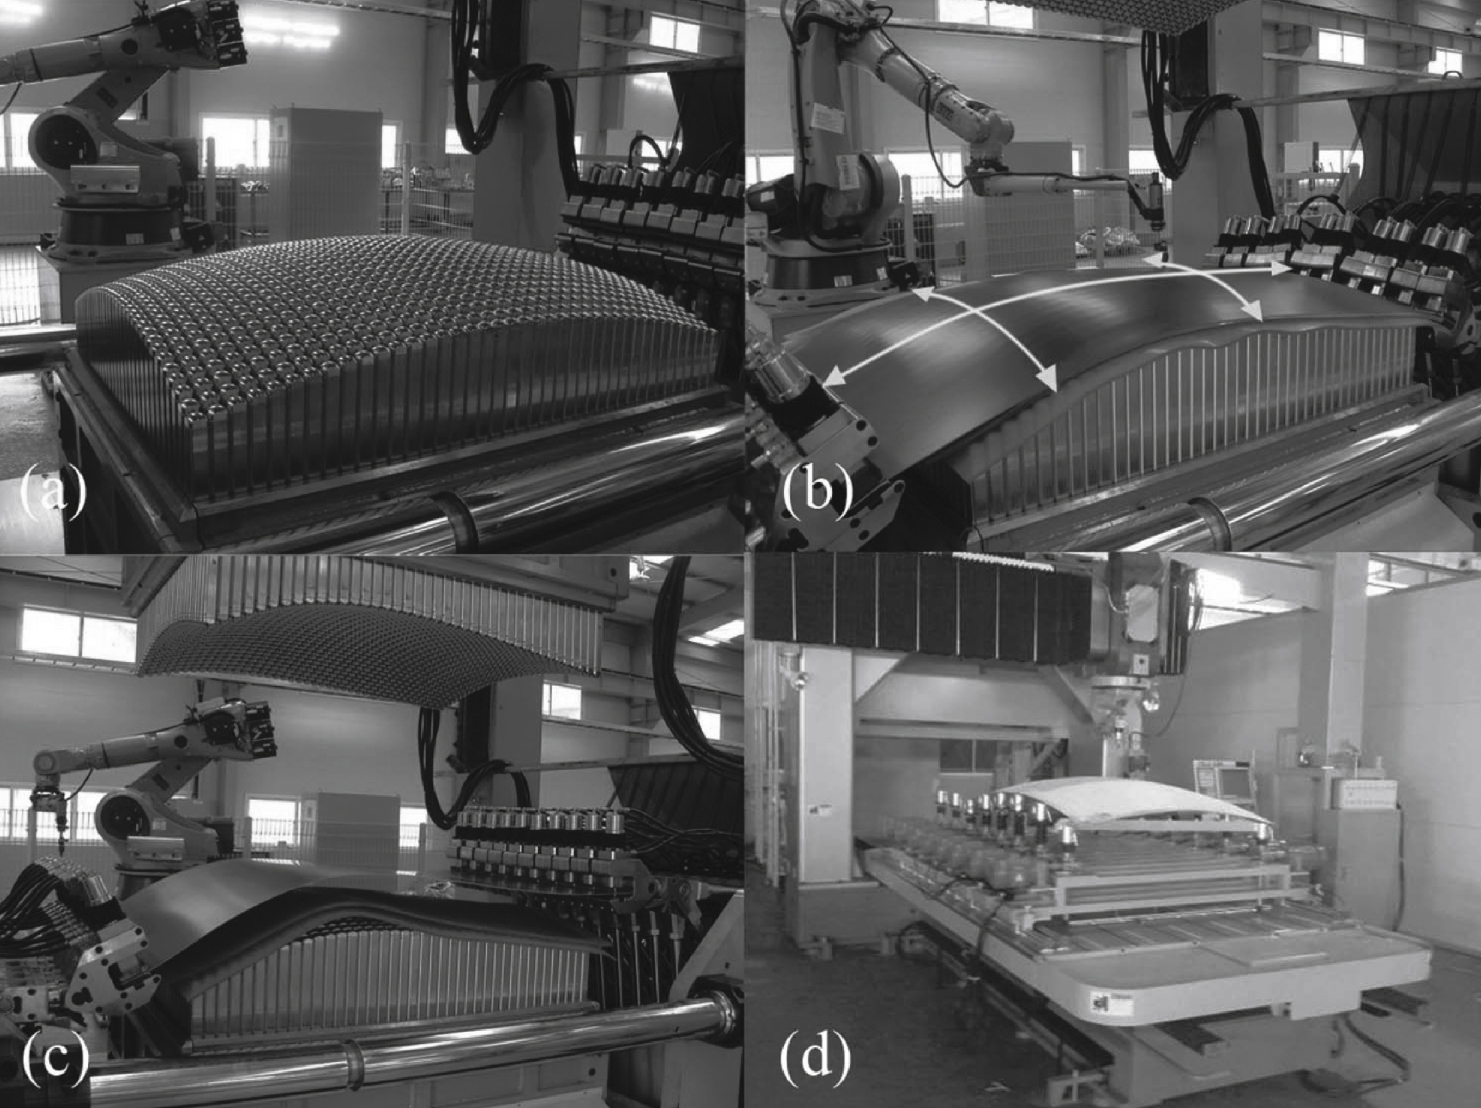 Multipoint stretch forming machine (photographs: courtesy of SteelLife).